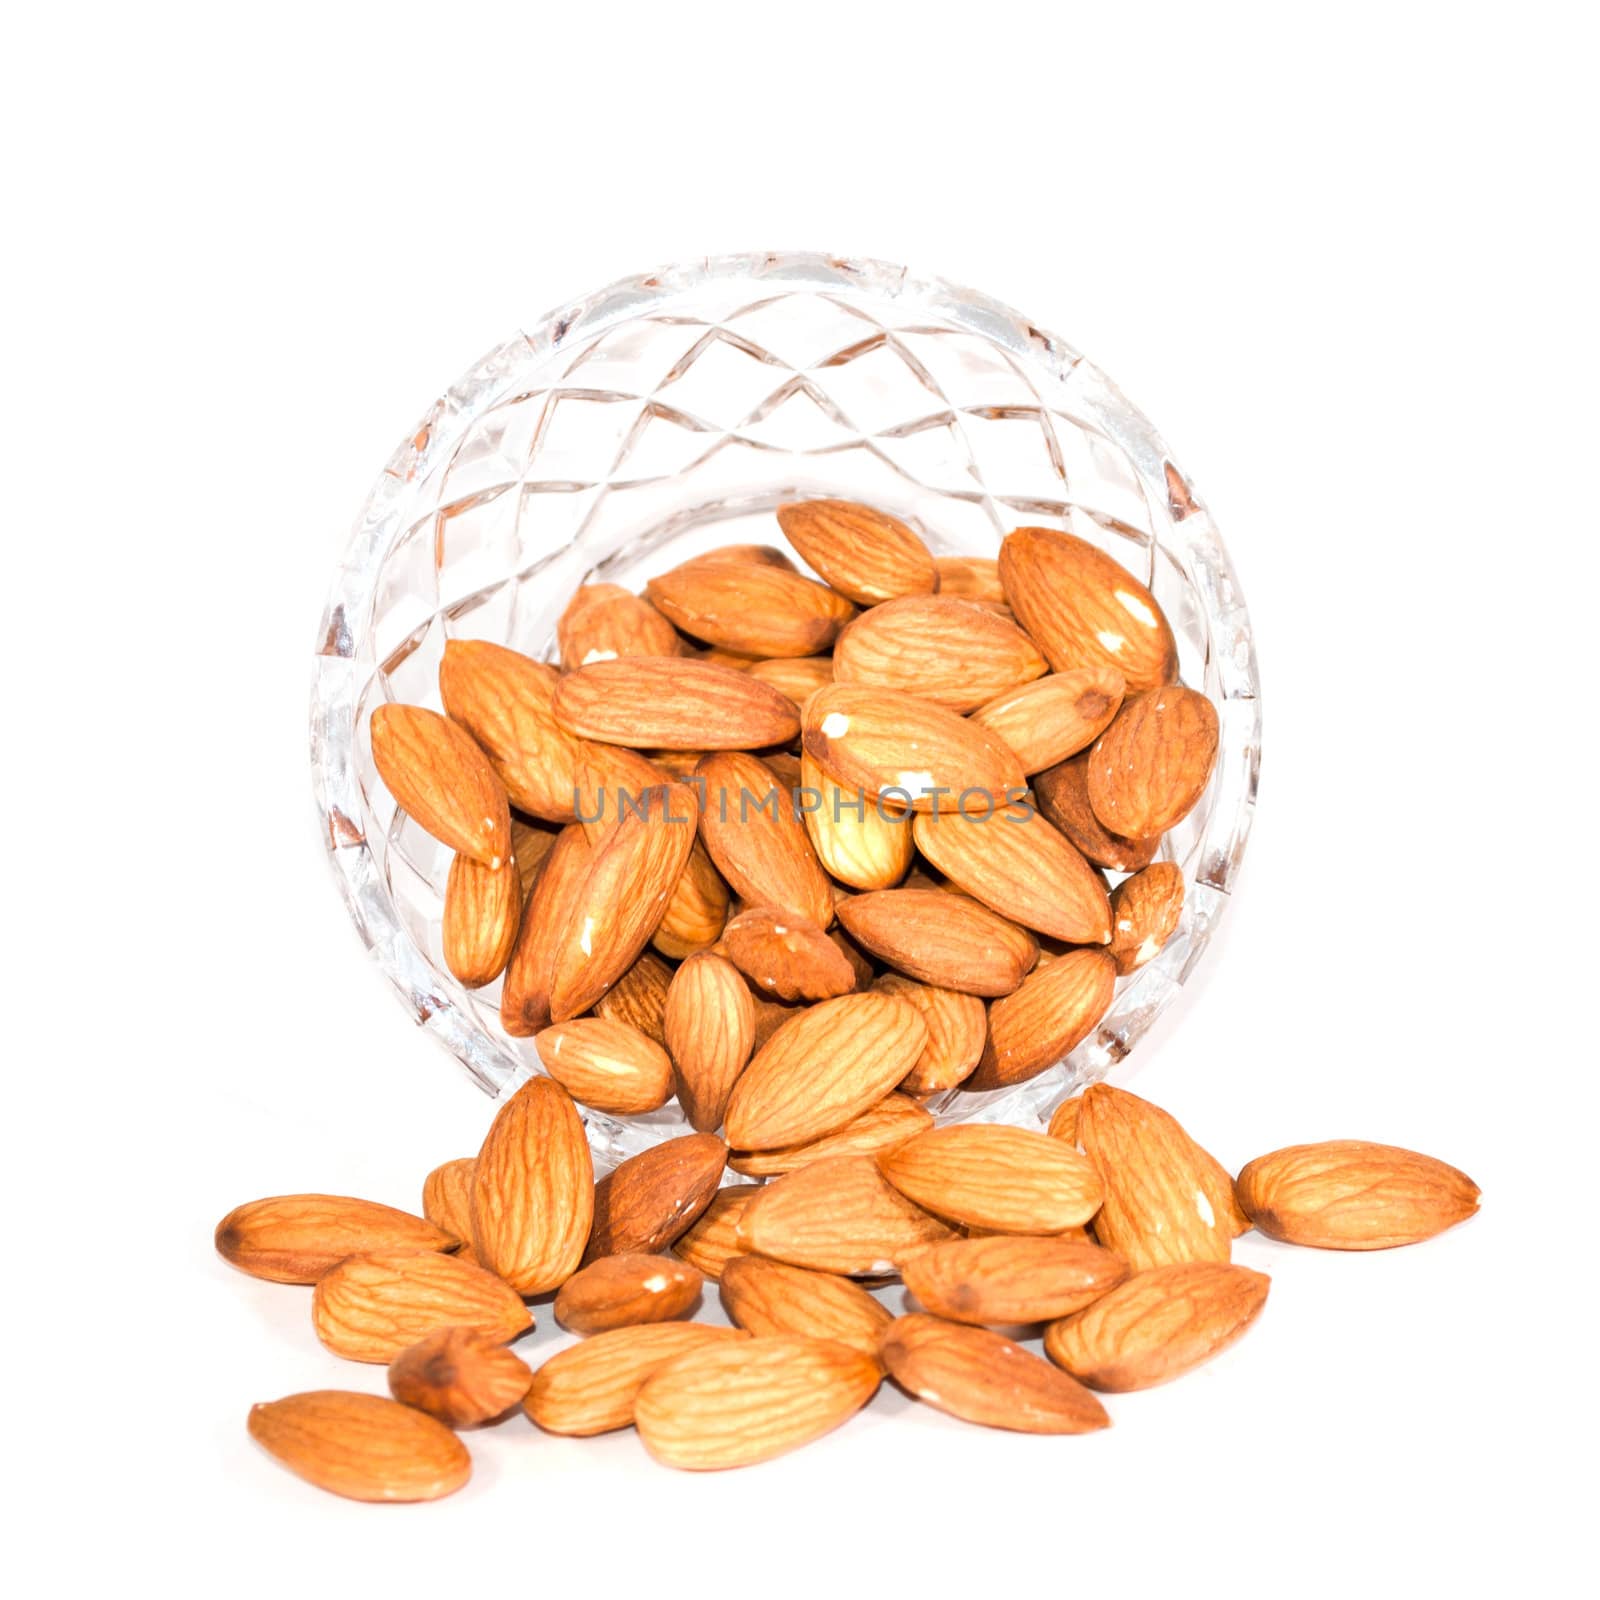 A glass bowl of almonds isolated on white